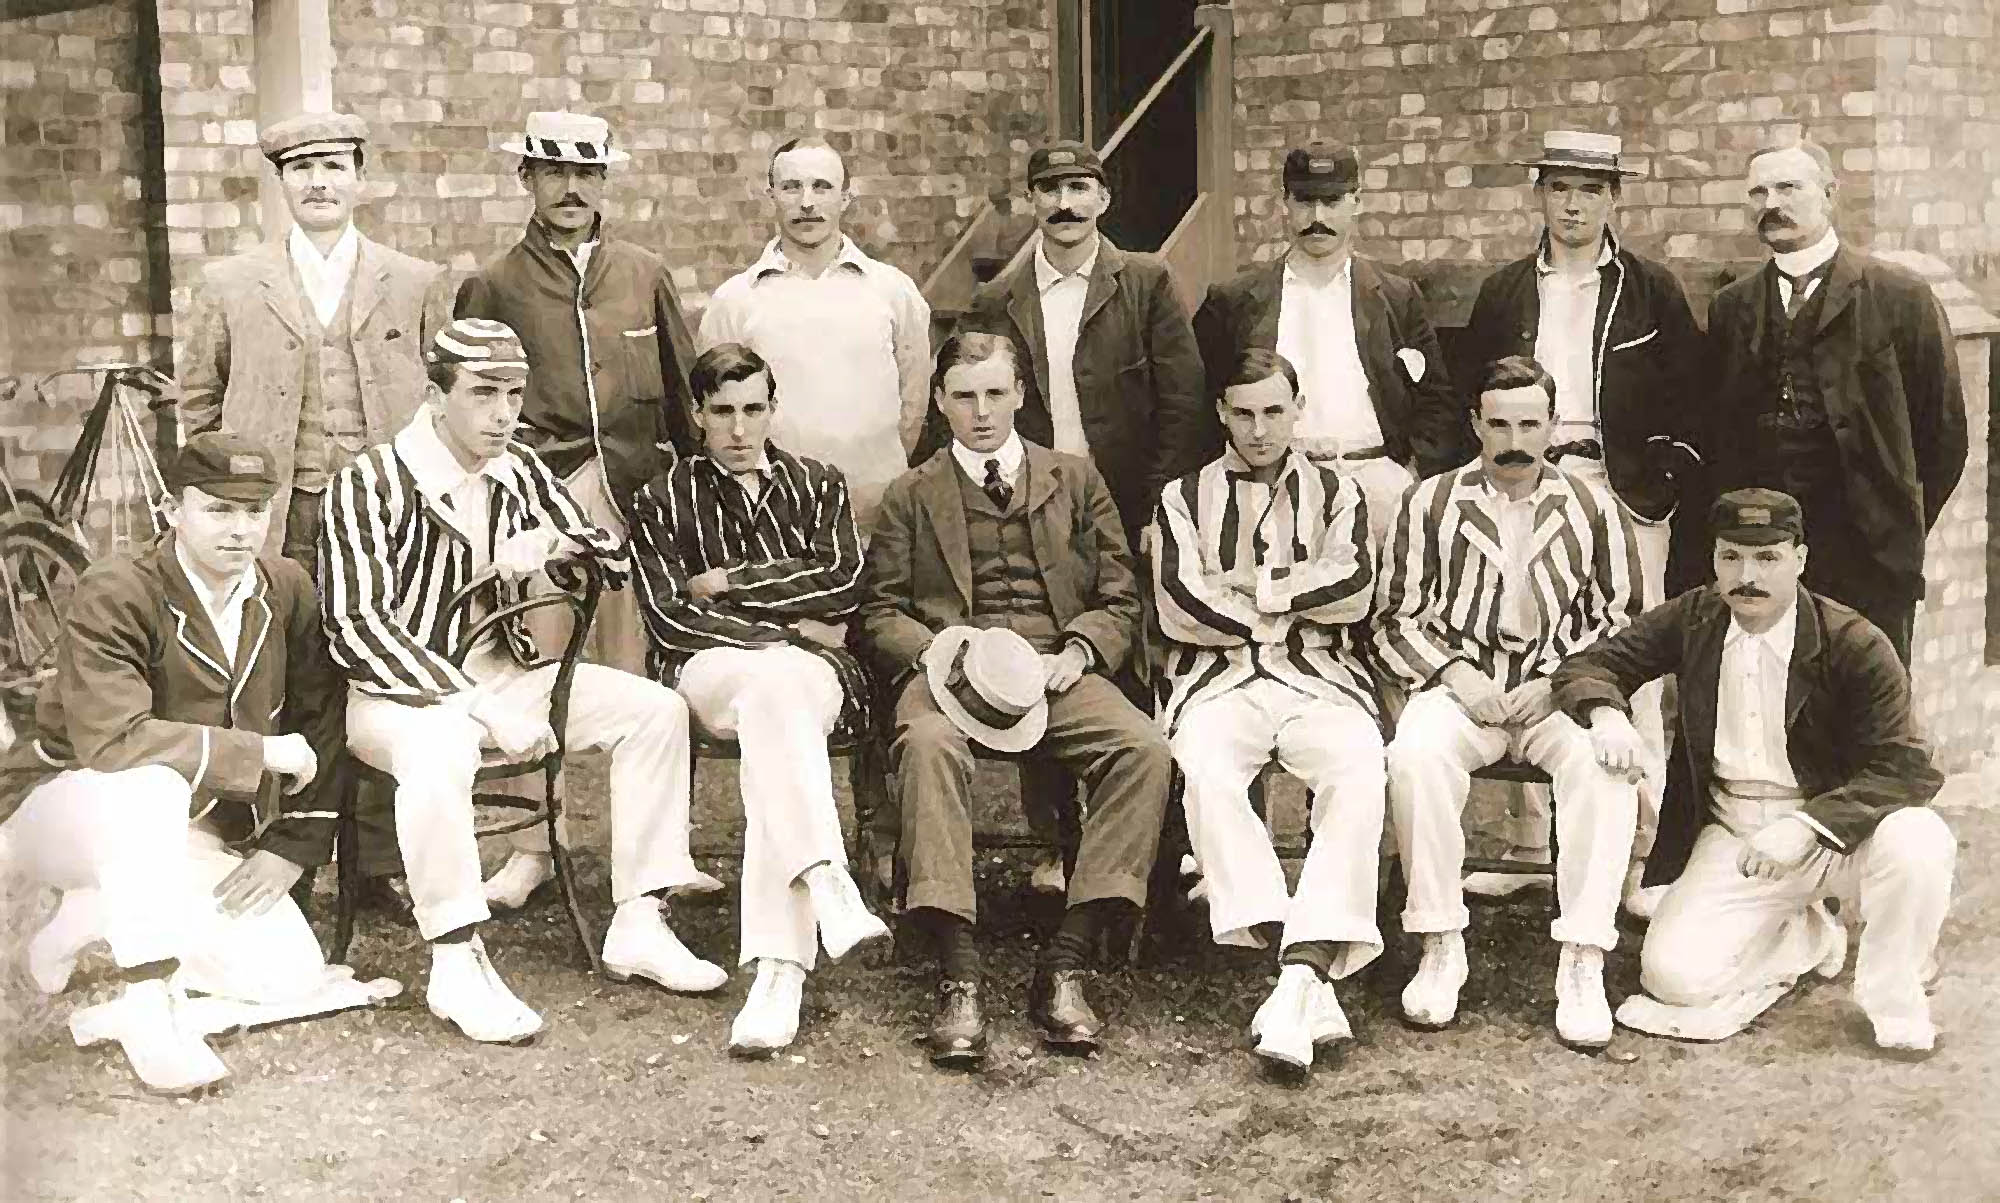 Leicestershire cricket team in 1903 - Leicestershire County Cricket Club